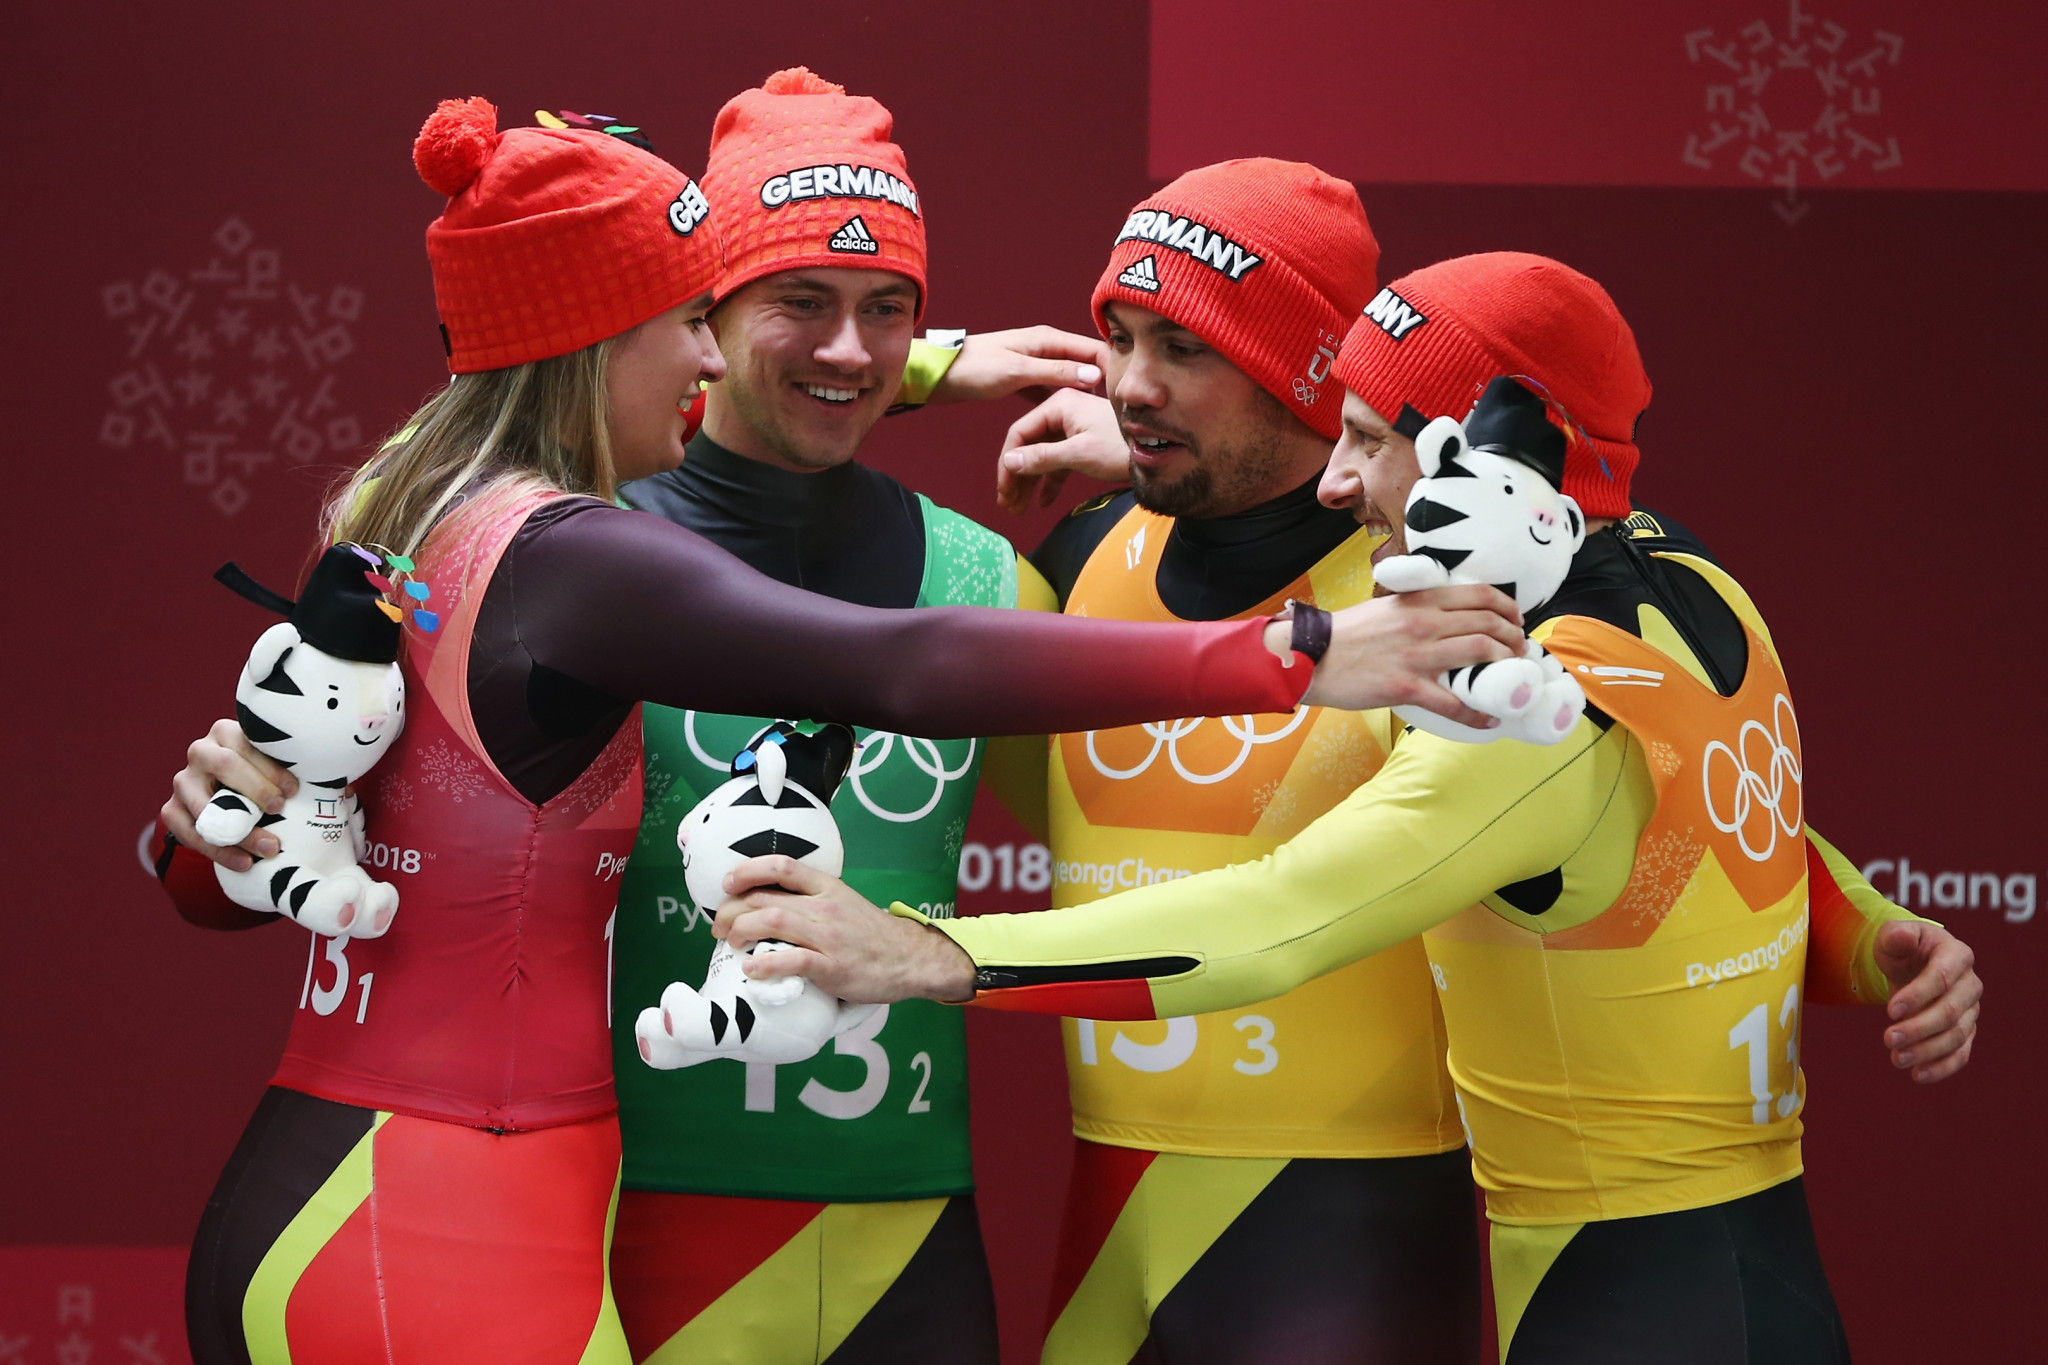 Germany remain the only team to have ever topped the podium in the luge team relay at an Olympic Games ©Getty Images